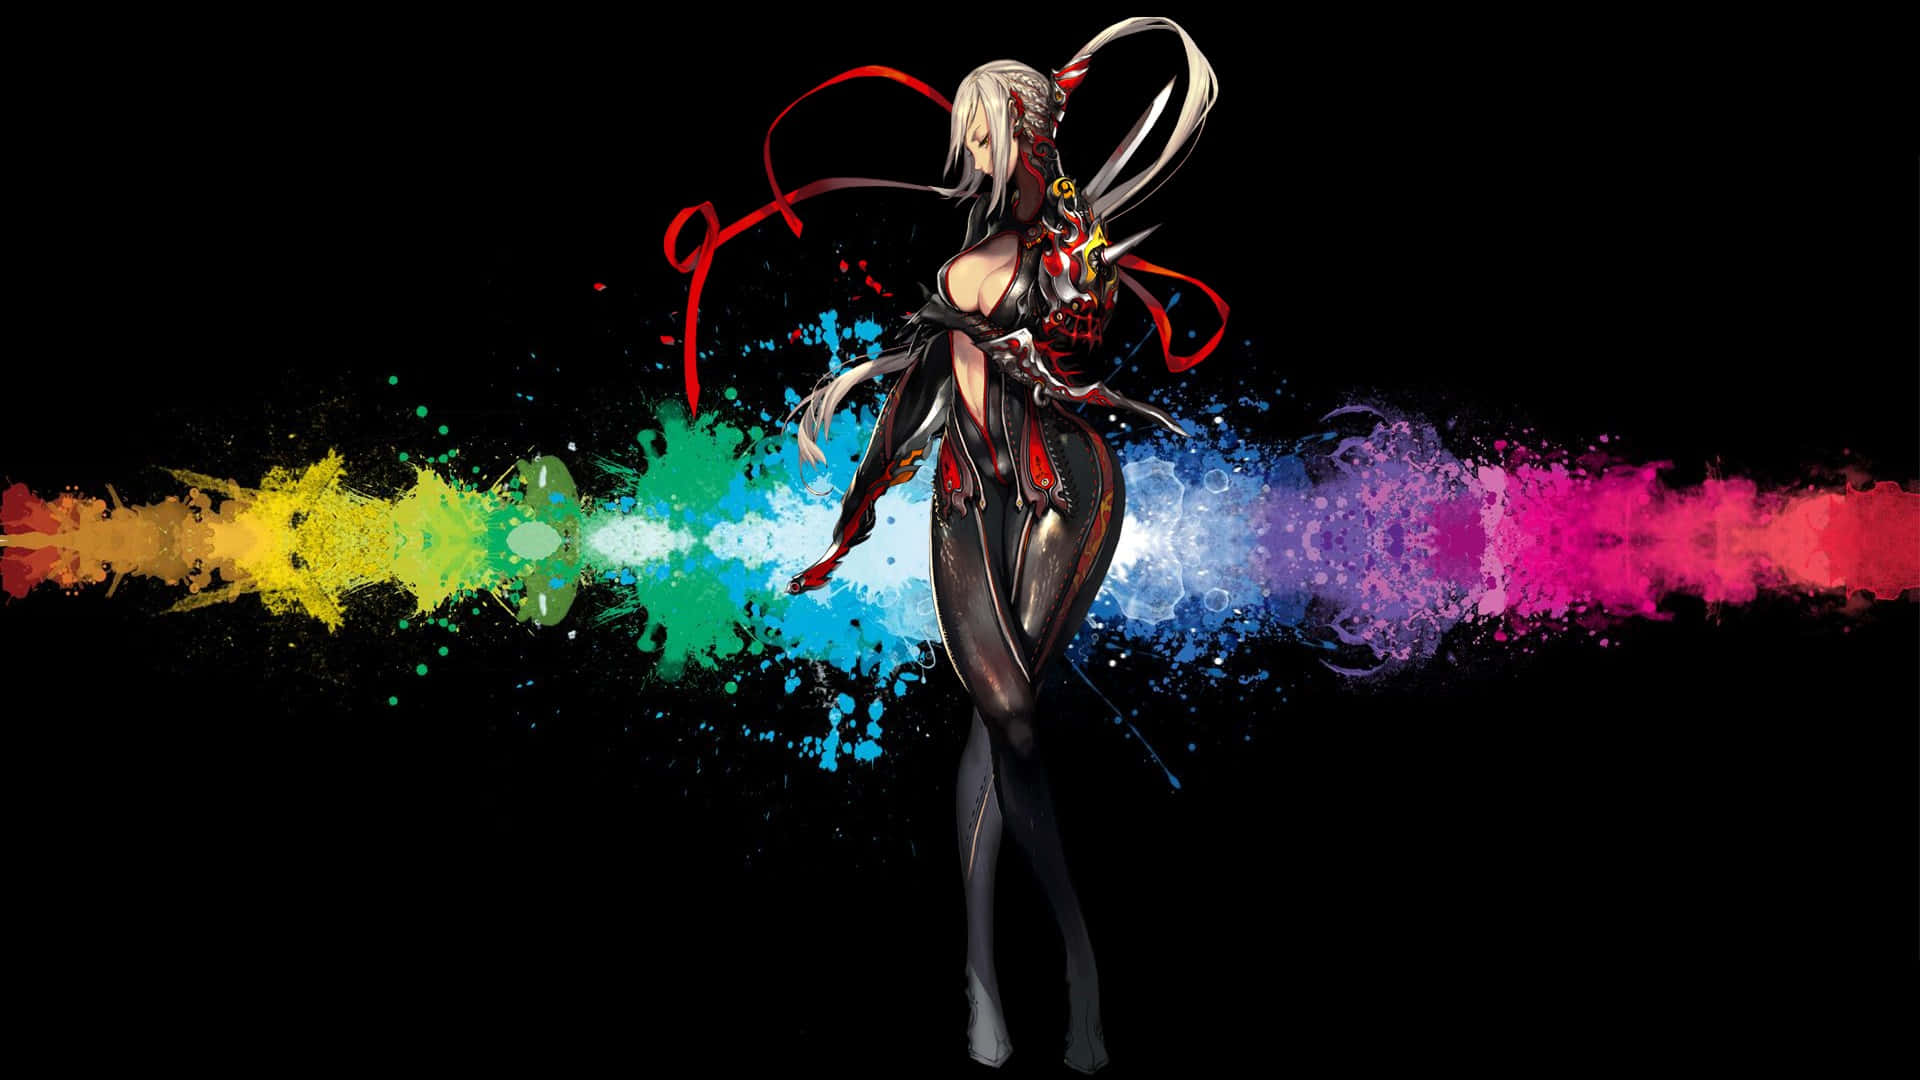 Relentless action in the fantastical realm of Blade and Soul Wallpaper